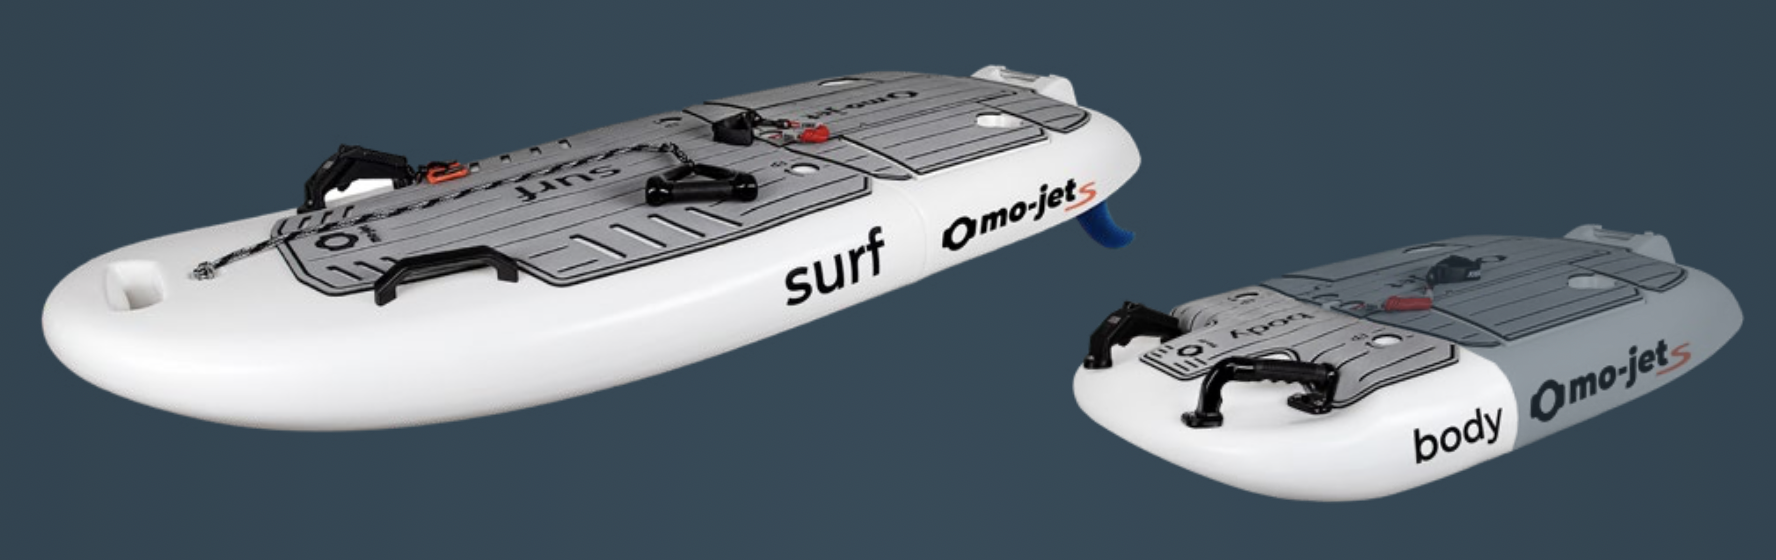 package MO-JET surf et body b